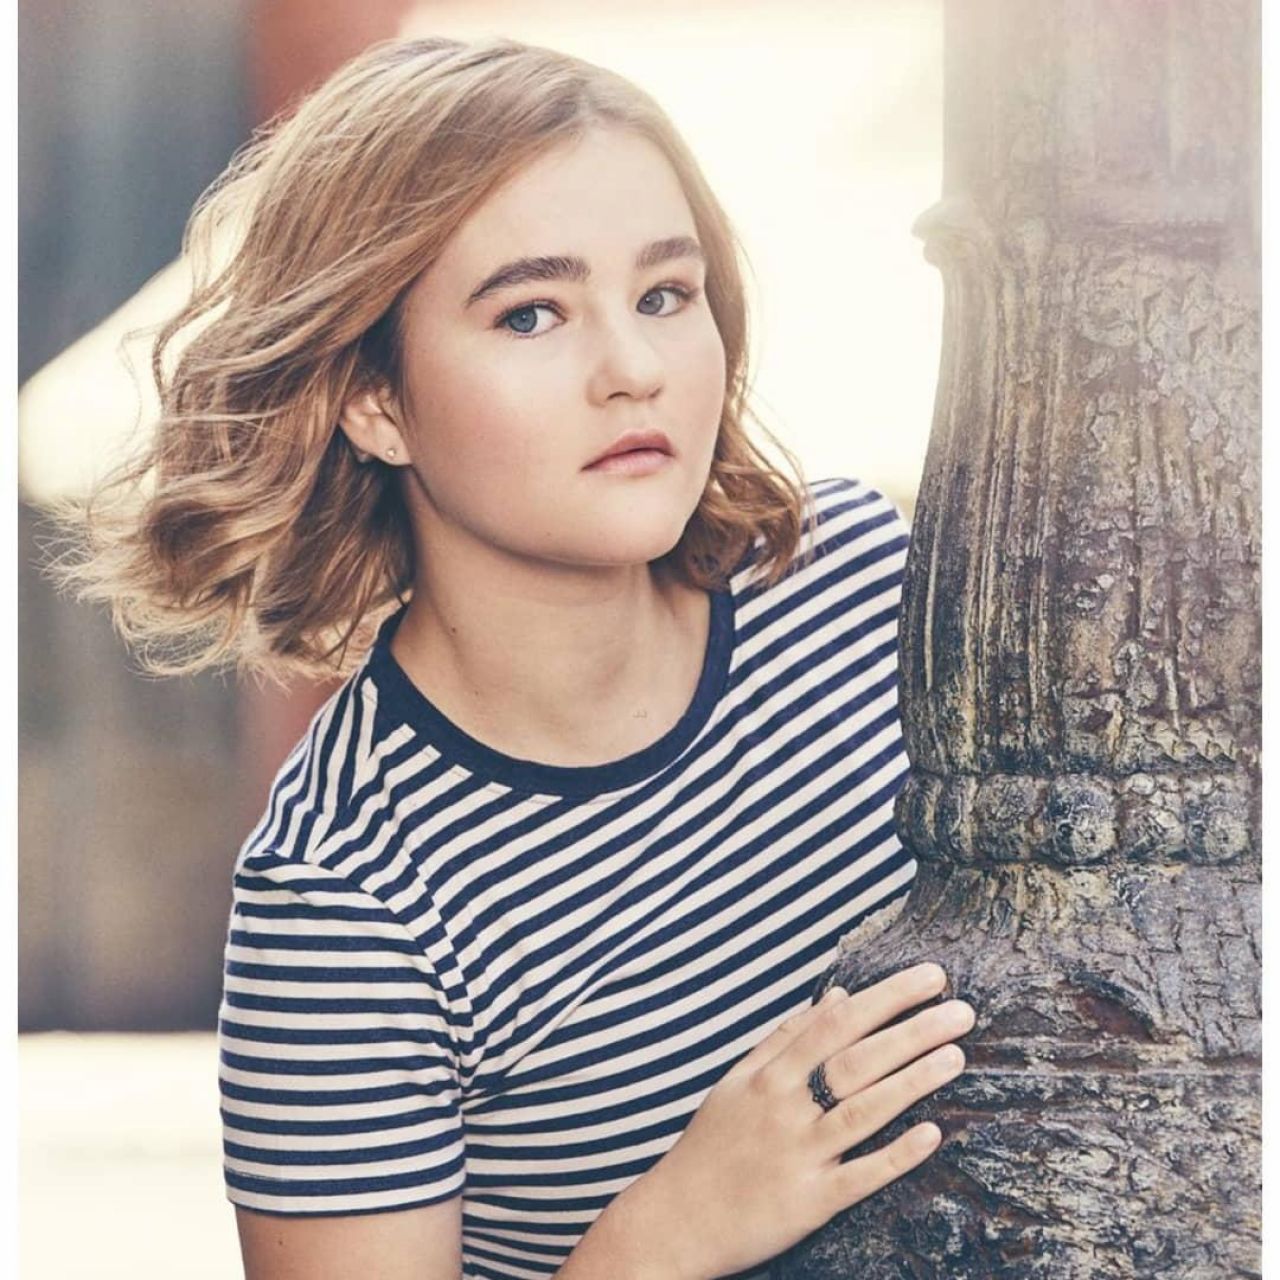 The tee-shirt striped blue and white worn by Millicent Simmonds on his acco...